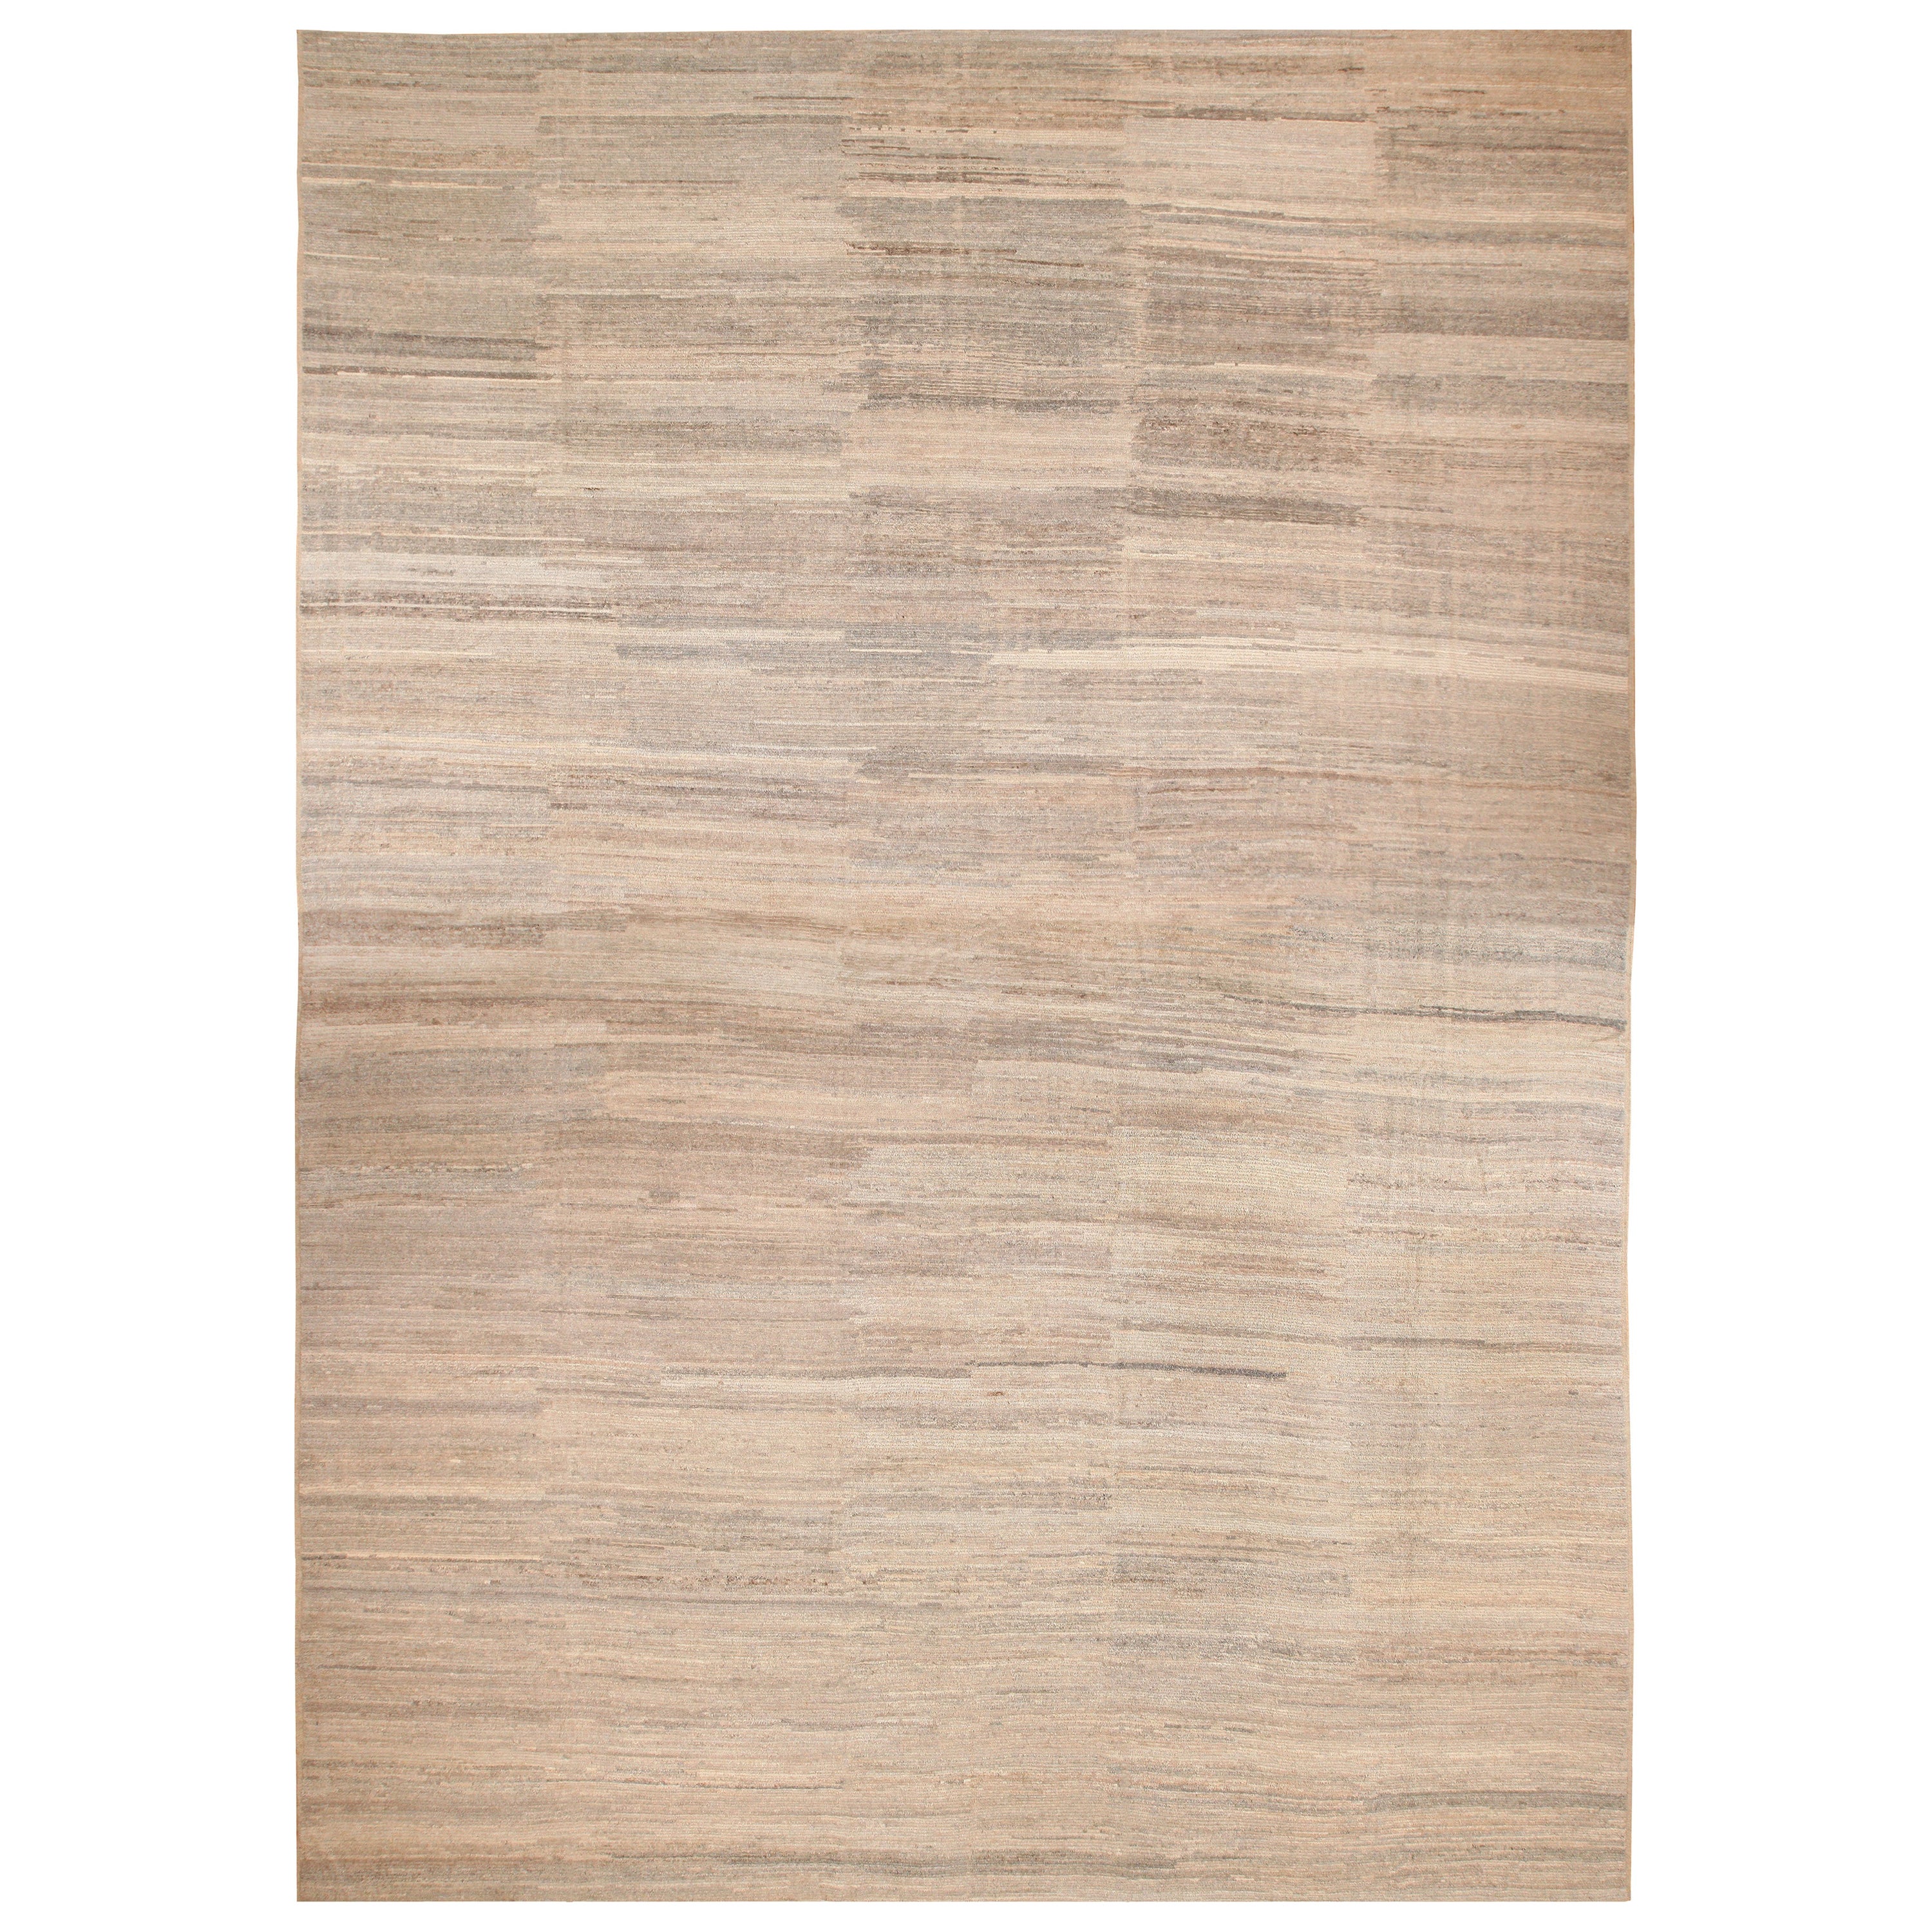 Nazmiyal Collection Beige Modern Distressed Rug. 18 ft 9 in x 25 ft 8 in